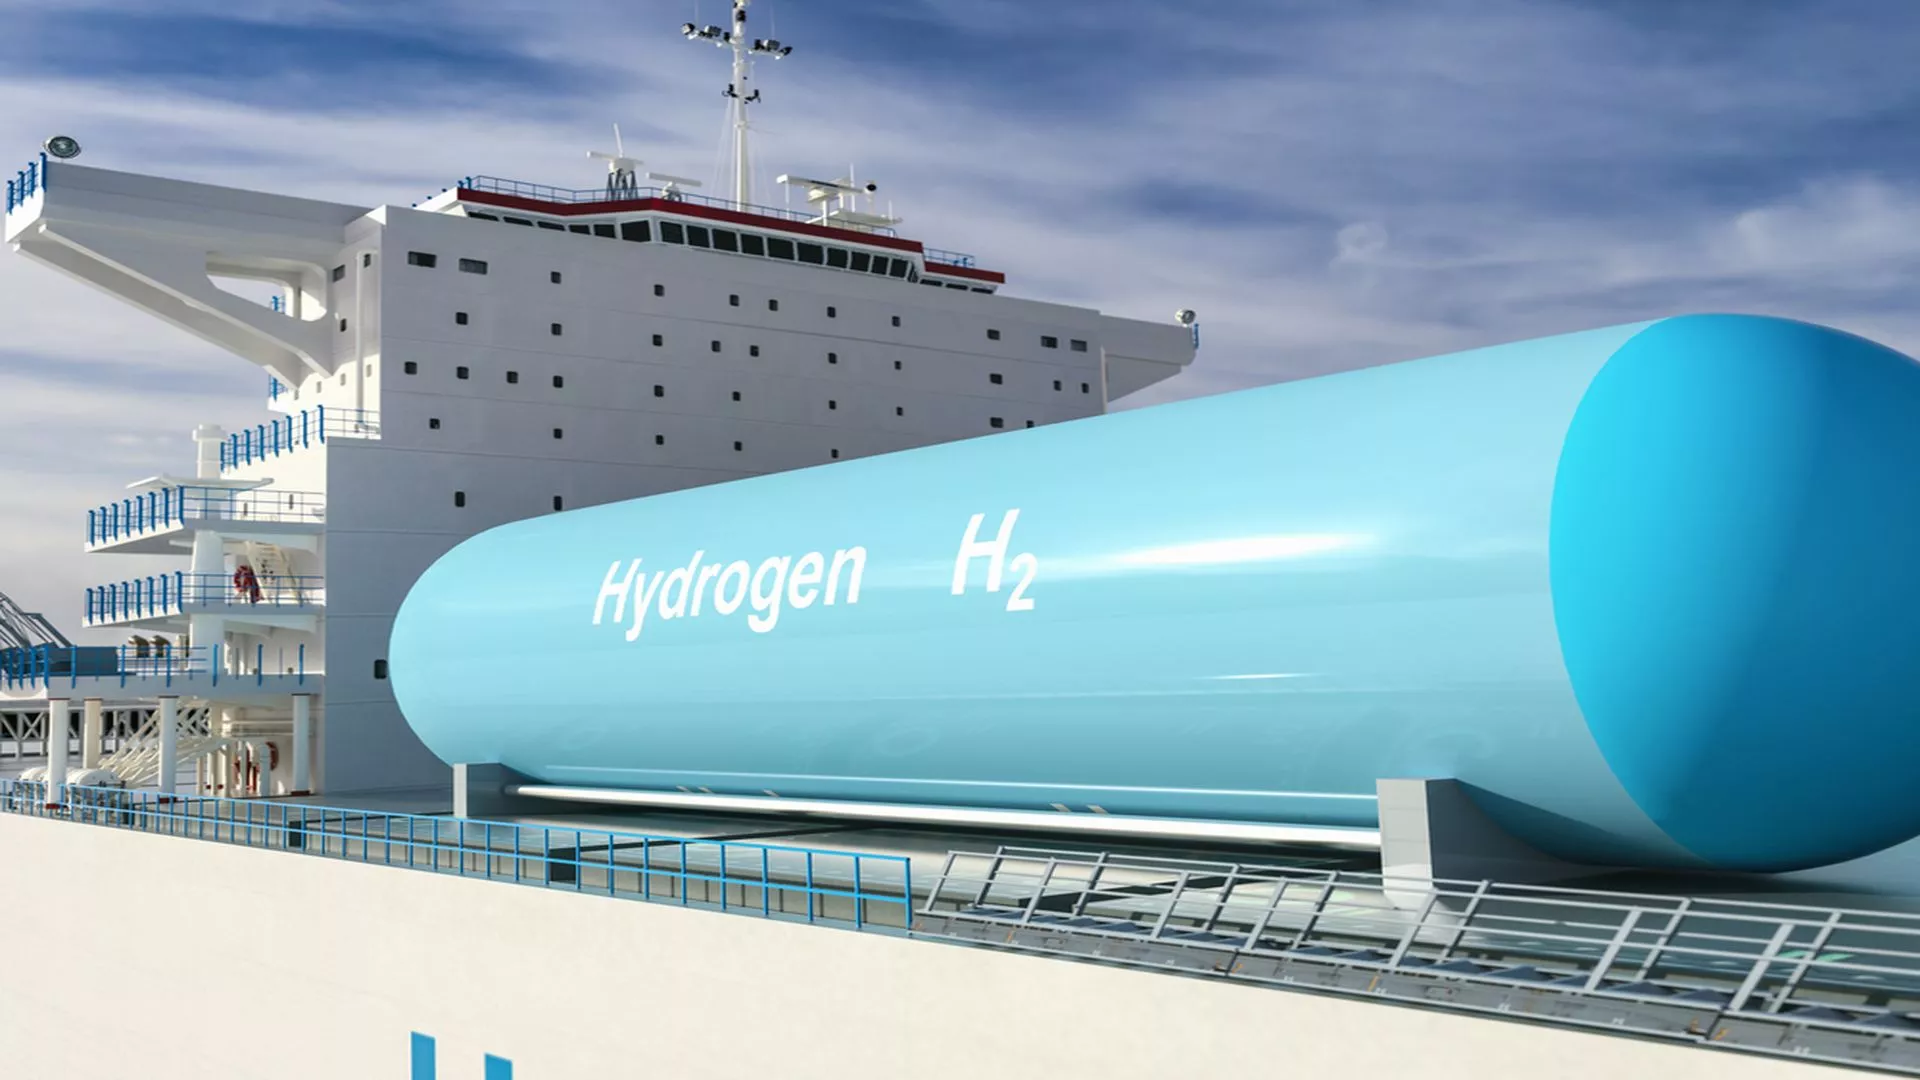 The largest hydrogen ships in the world will be built in Norway